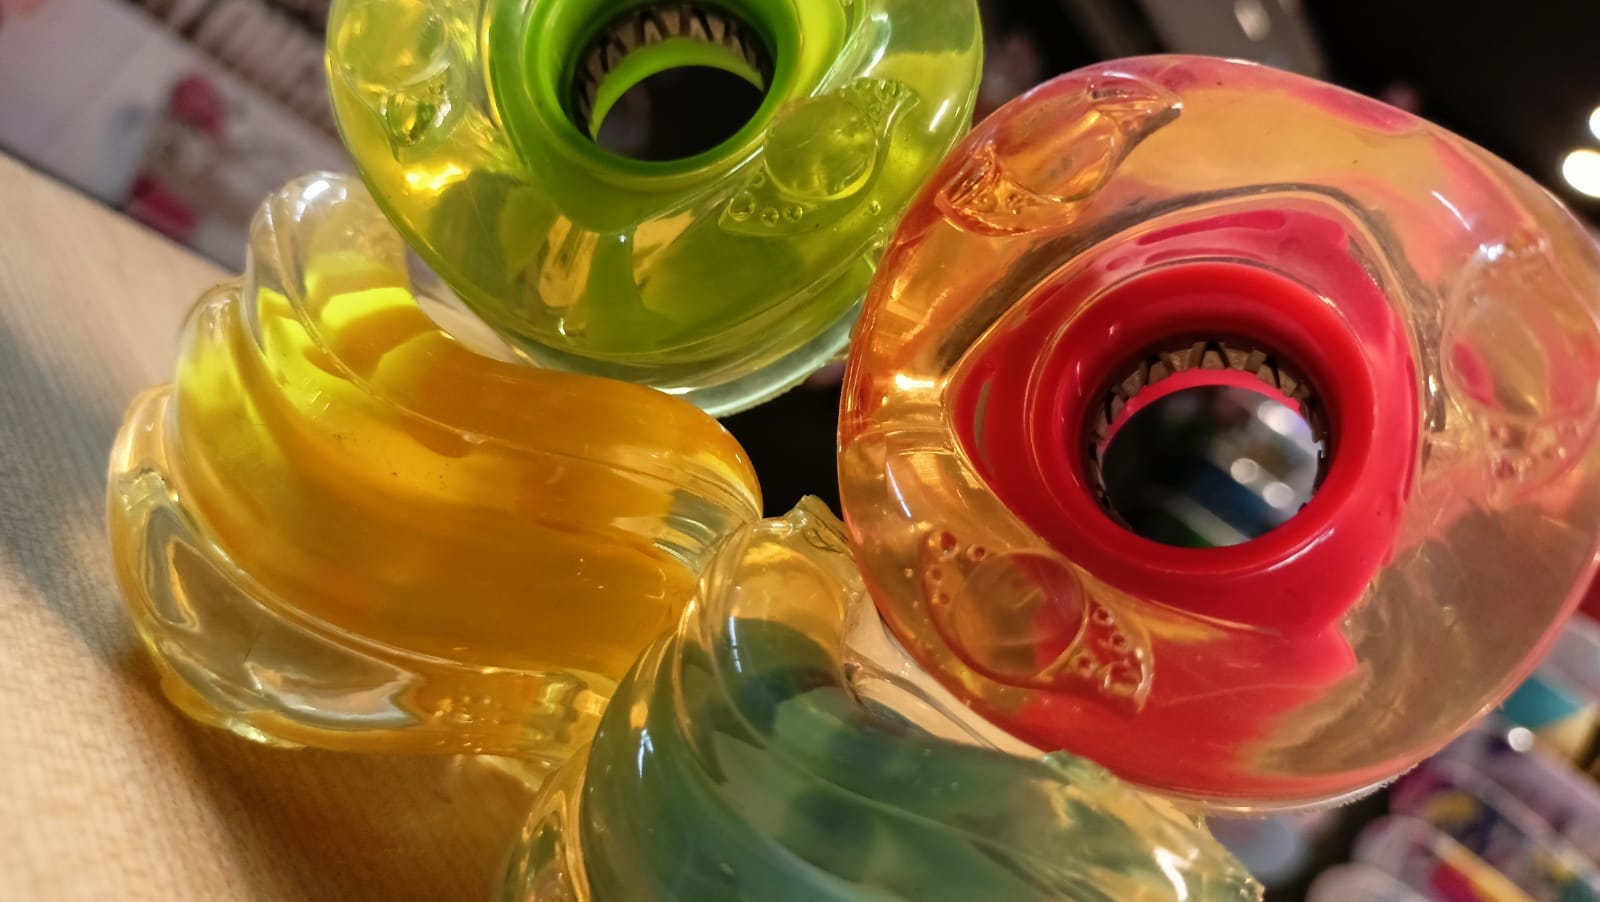 With their unique take on classic longboard wheels, the creative team from the brand has redefined wheels in general.